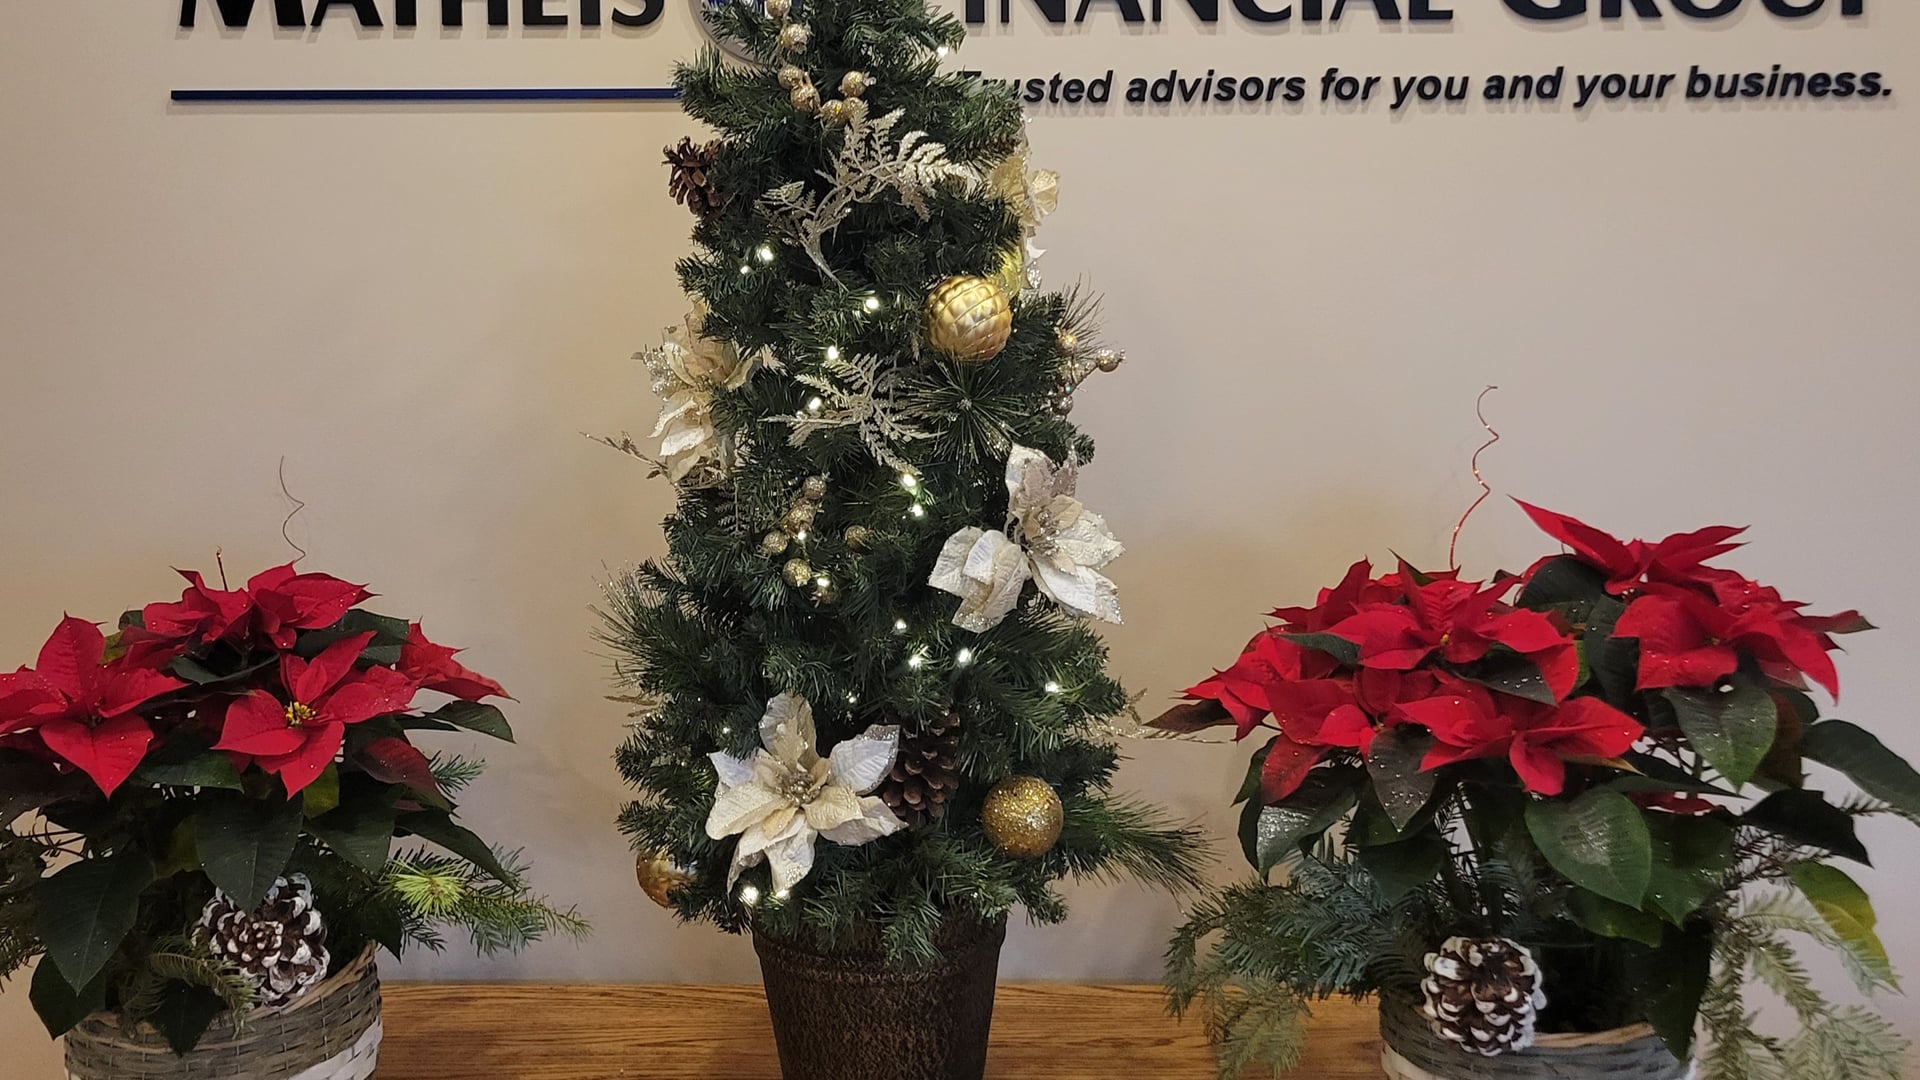 Happy Holidays from our team at Matheis Financial Group!